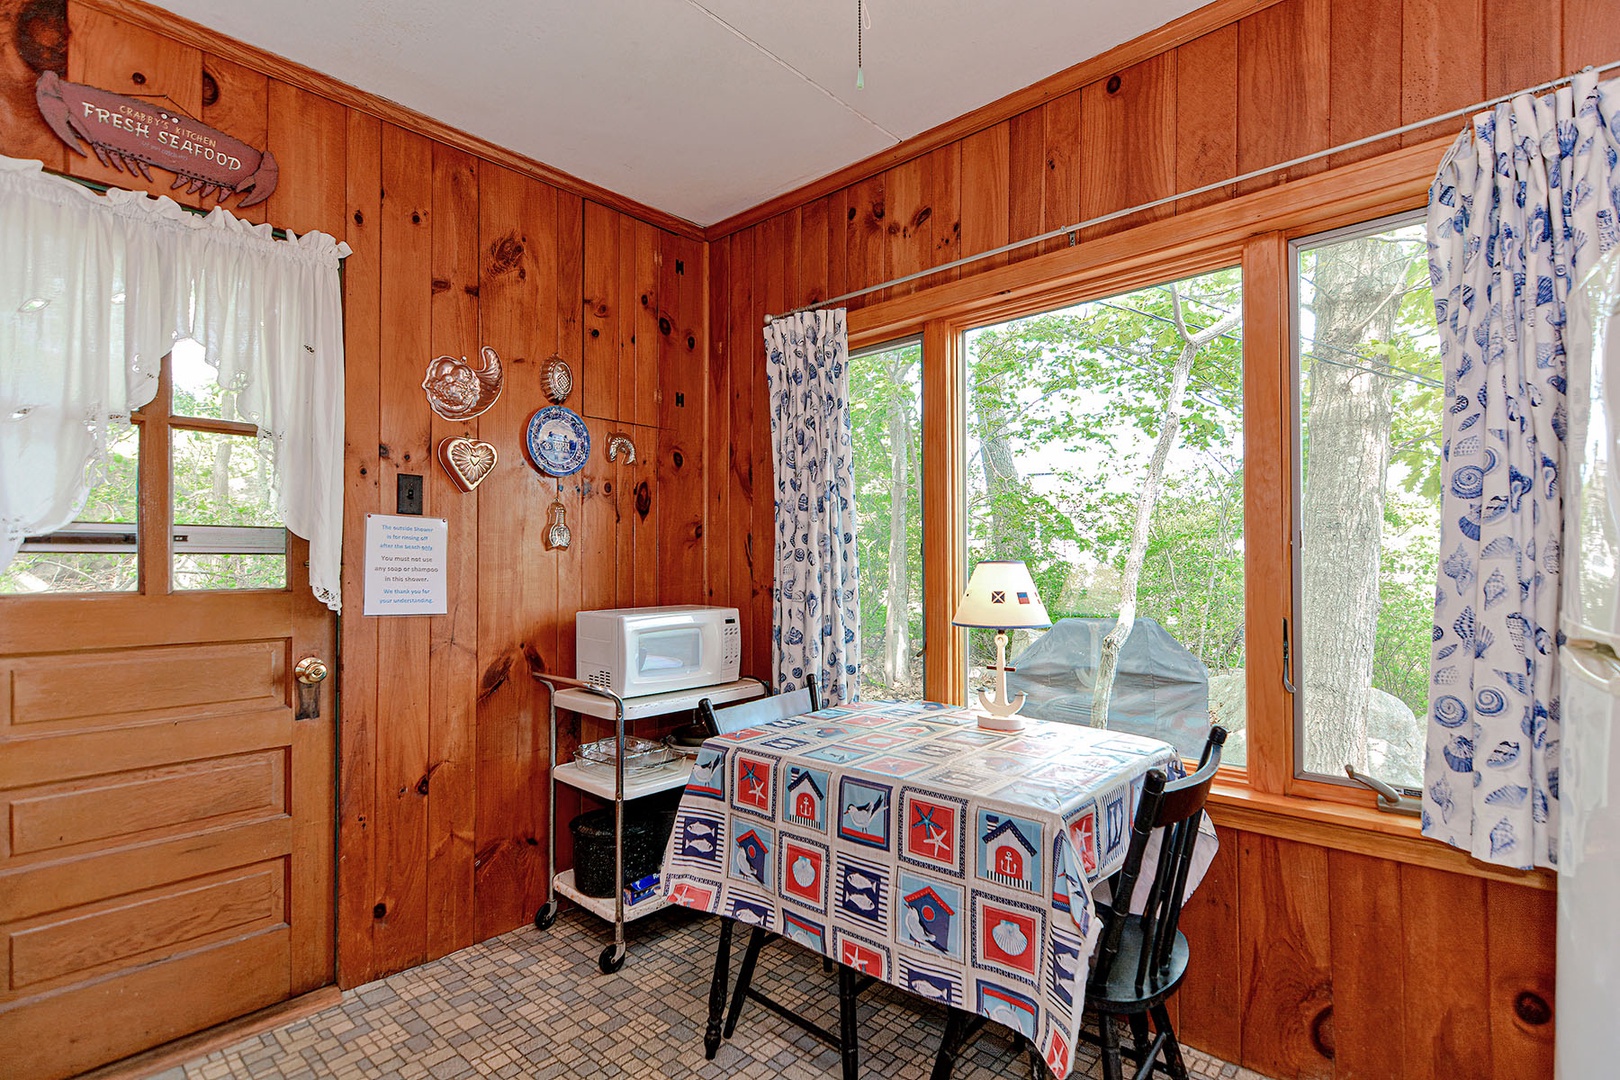 The cozy cottage has an eat-in kitchen.